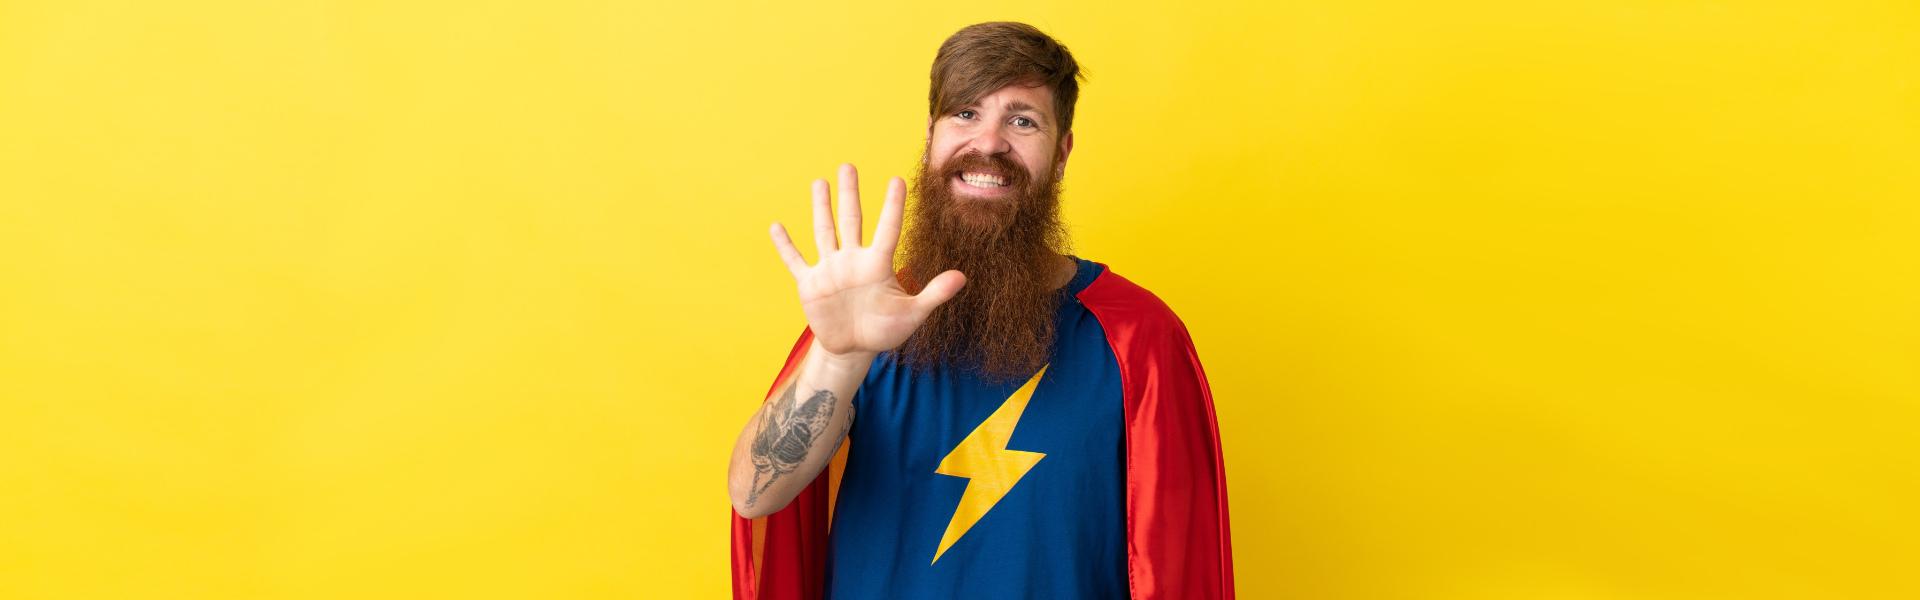 redhead super hero man counting five with fingers